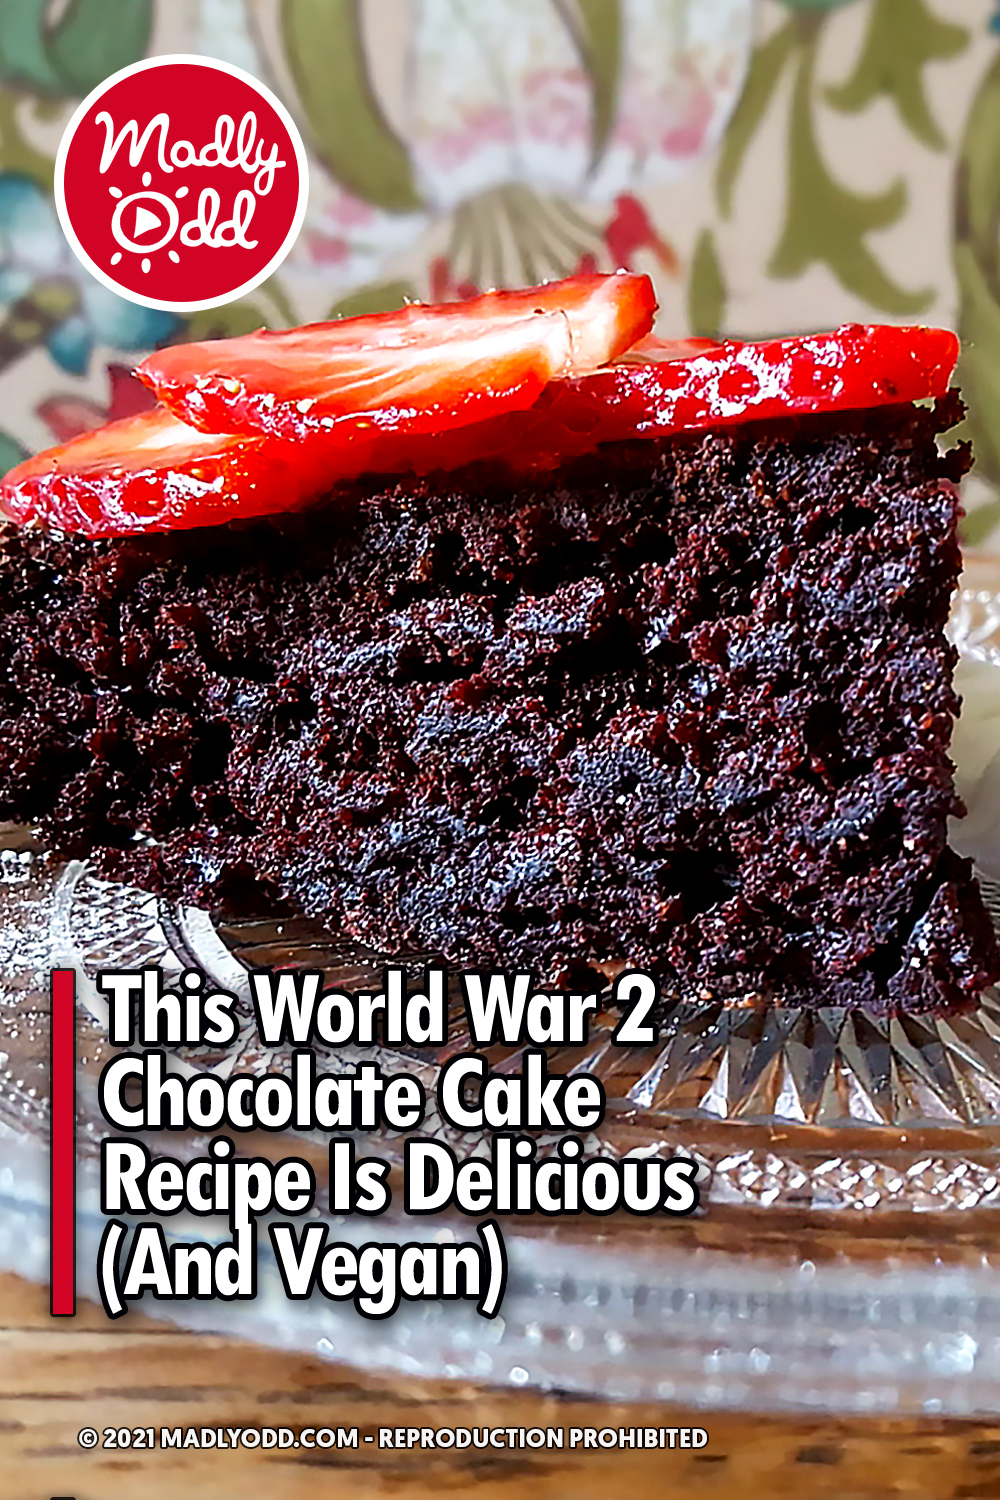 This World War 2 Chocolate Cake Recipe Is Delicious (And Vegan)